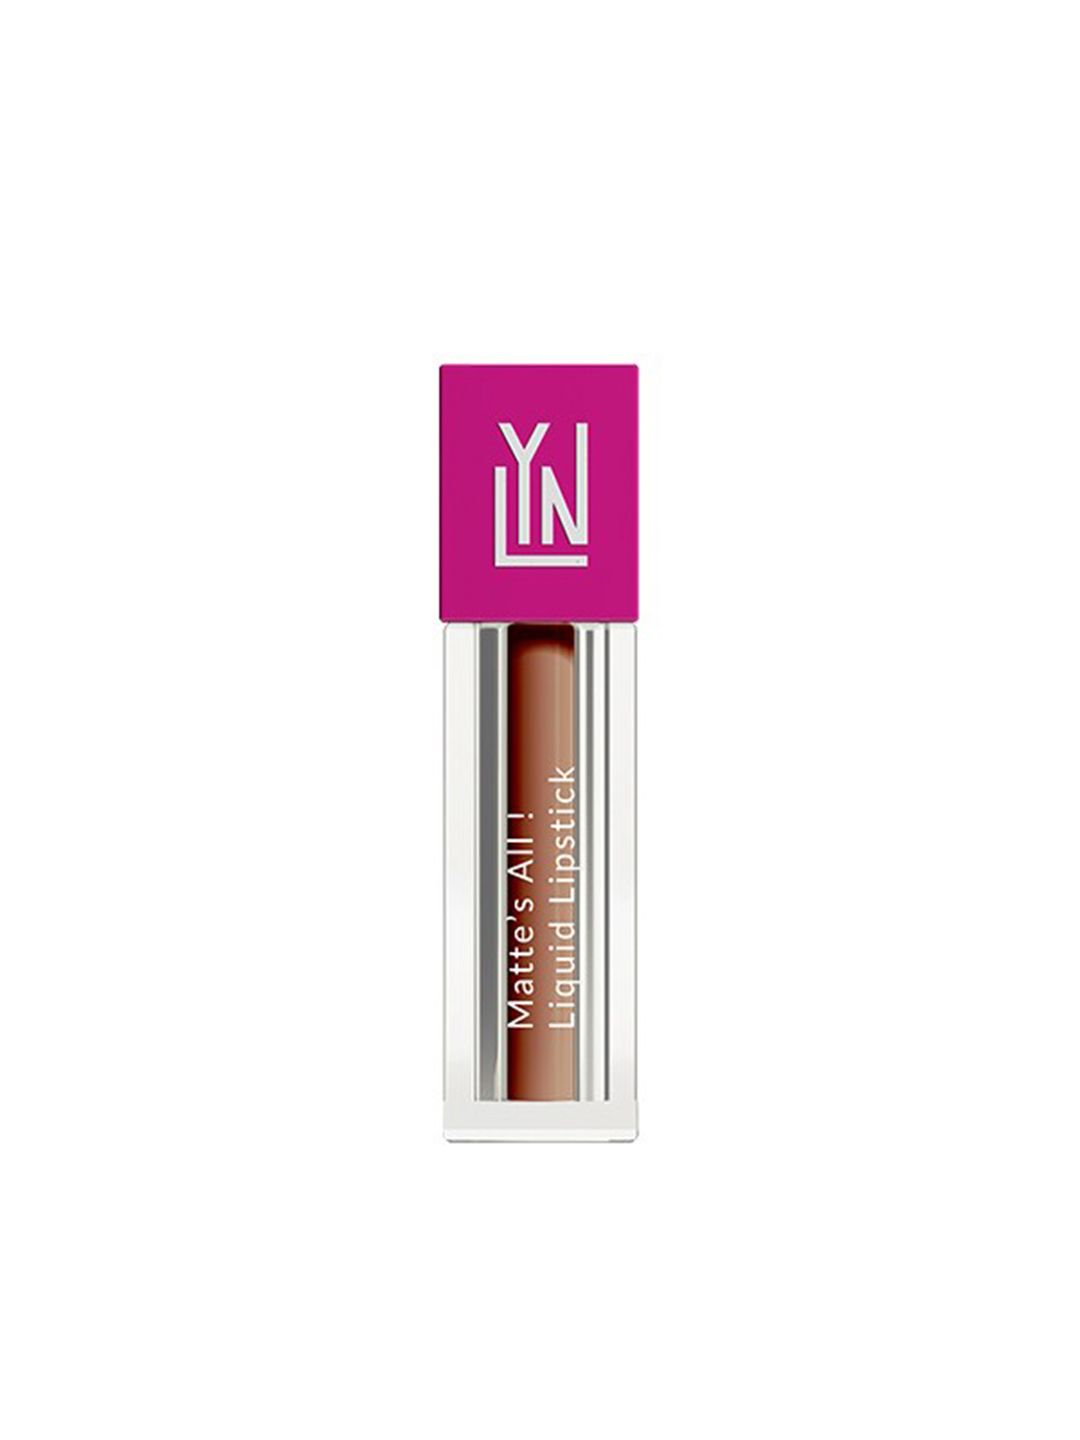 LYN LIVE YOUR NOW Nude Matte Liquid Lipstick 1ml Price in India